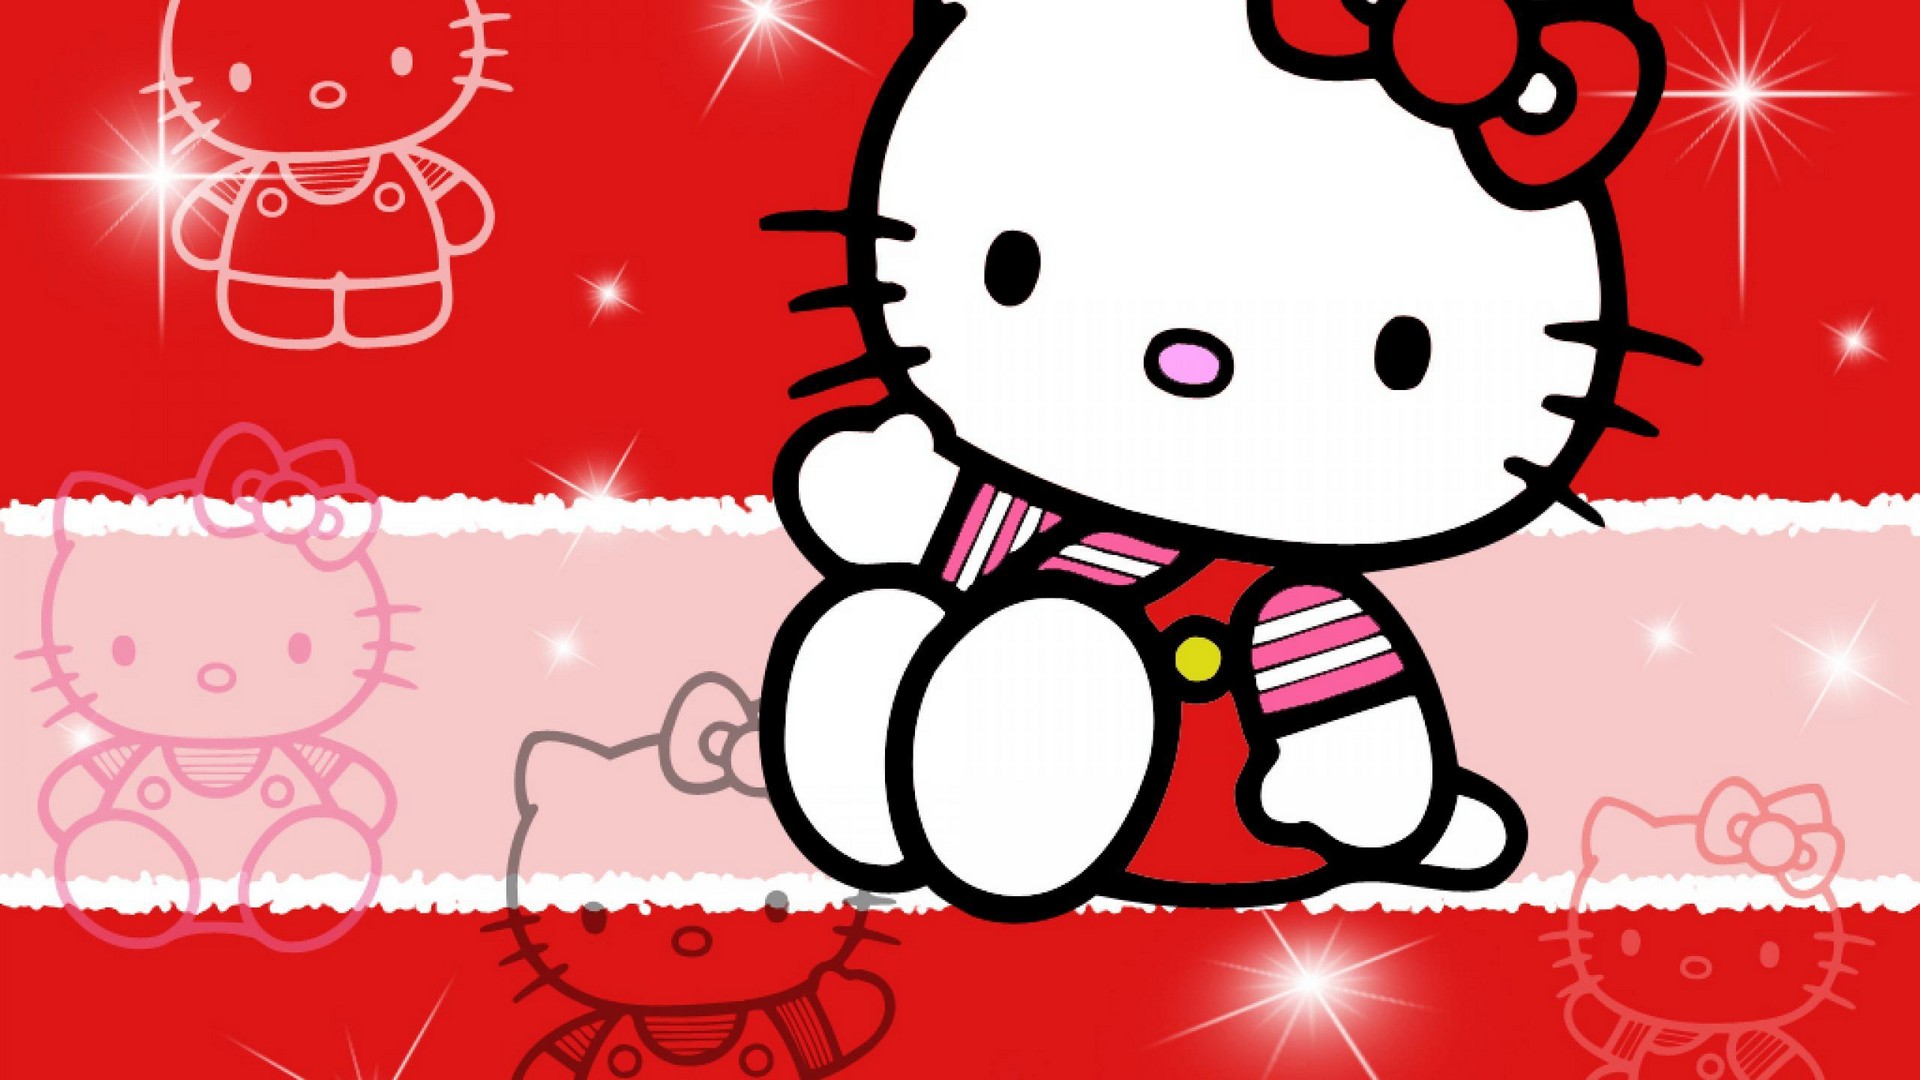 Wallpaper Hello Kitty Characters HD With Resolution 1920X1080 pixel. You can make this wallpaper for your Desktop Computer Backgrounds, Mac Wallpapers, Android Lock screen or iPhone Screensavers